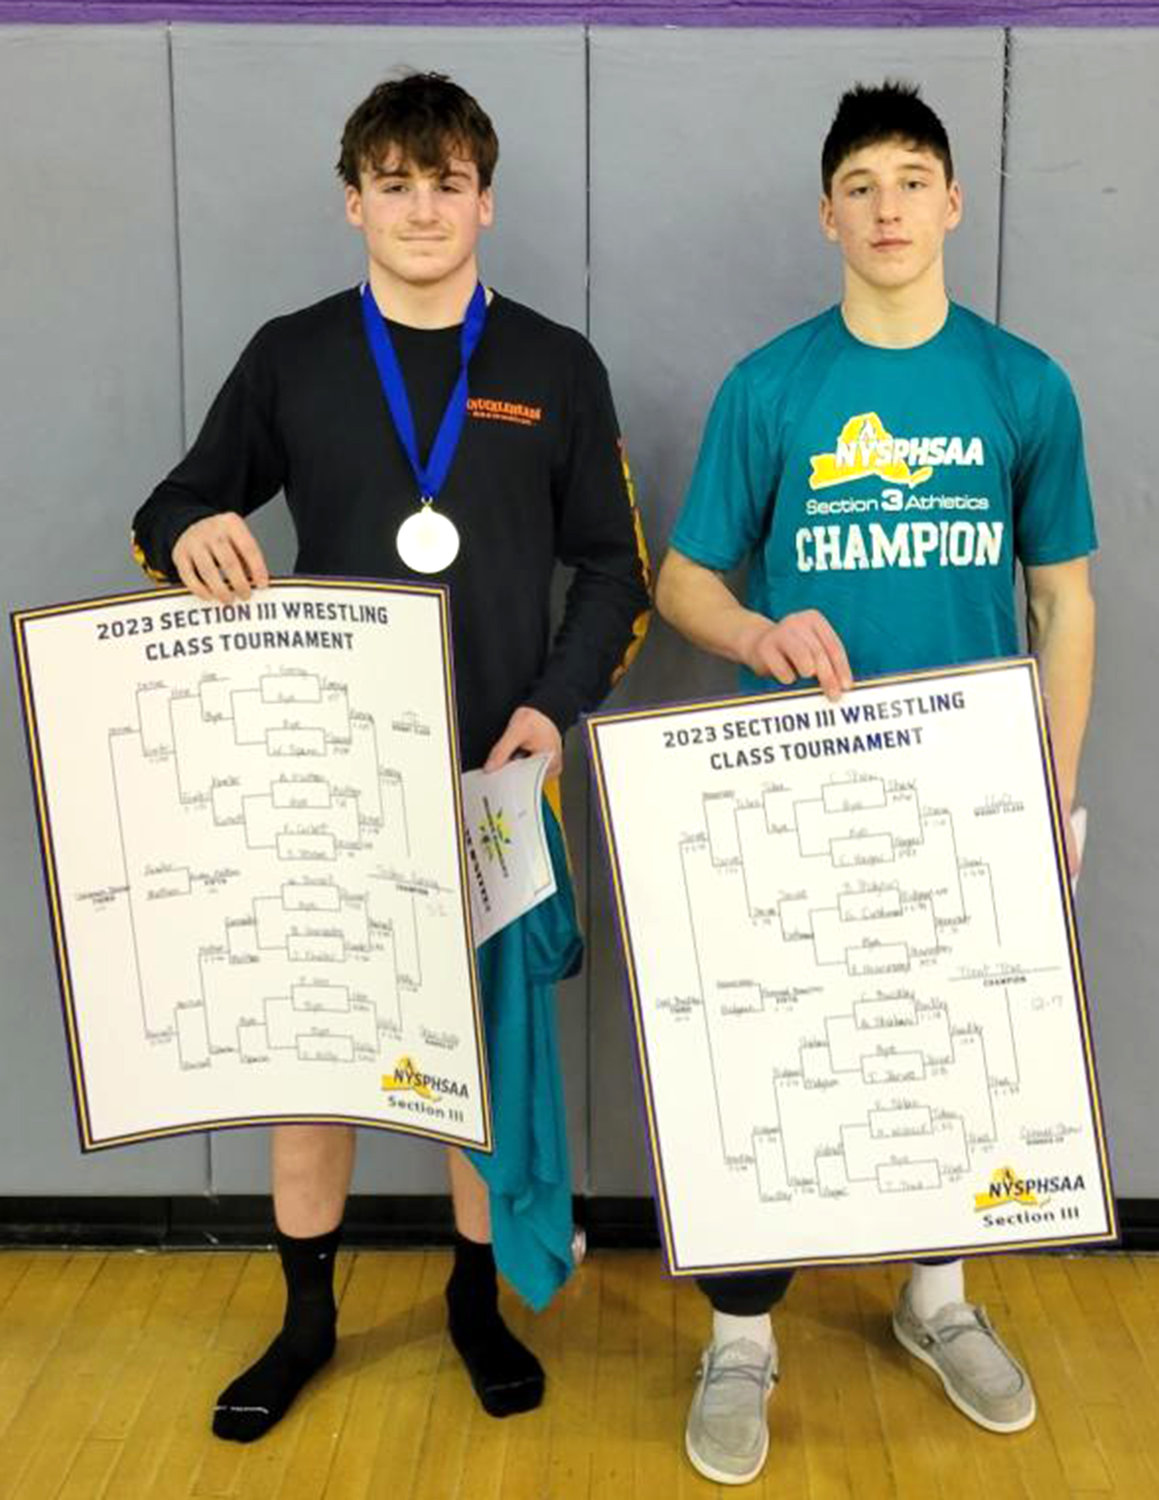 Holland Patent’s two Class C wrestling champions pose with their brackets this past weekend. Jordan Koenig, left, won the 172-pound weight class and Trent True won at 160 and was named the tournament’s Most Outstanding Wrestler. Both are among the local competitors taking part in this Saturday’s Section III tournament. Koenig is top-seeded and seeking a second trip to the state tournament. True is the two seed. Both are competing in Division II, the small schools division.